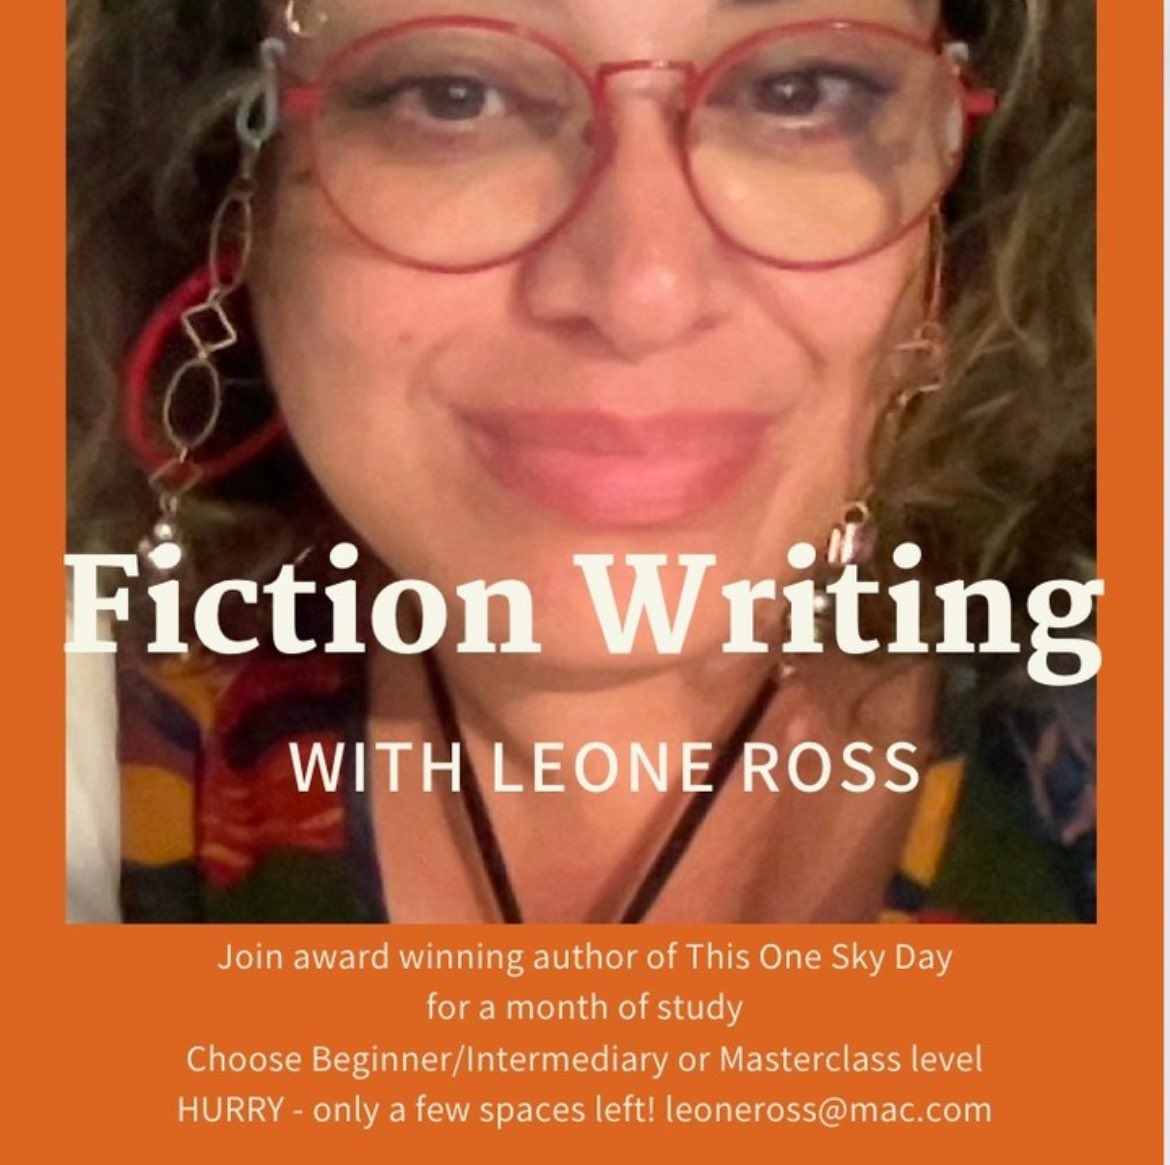 Please RT 😊. Author & educator Leone Ross has curated two ONLINE classes in Feb & April, open to writers all over the world. The Gentle Apprenticeship is for new writers or ones who haven’t written for a while. The Push You Need Masterclass is for more experienced writers.